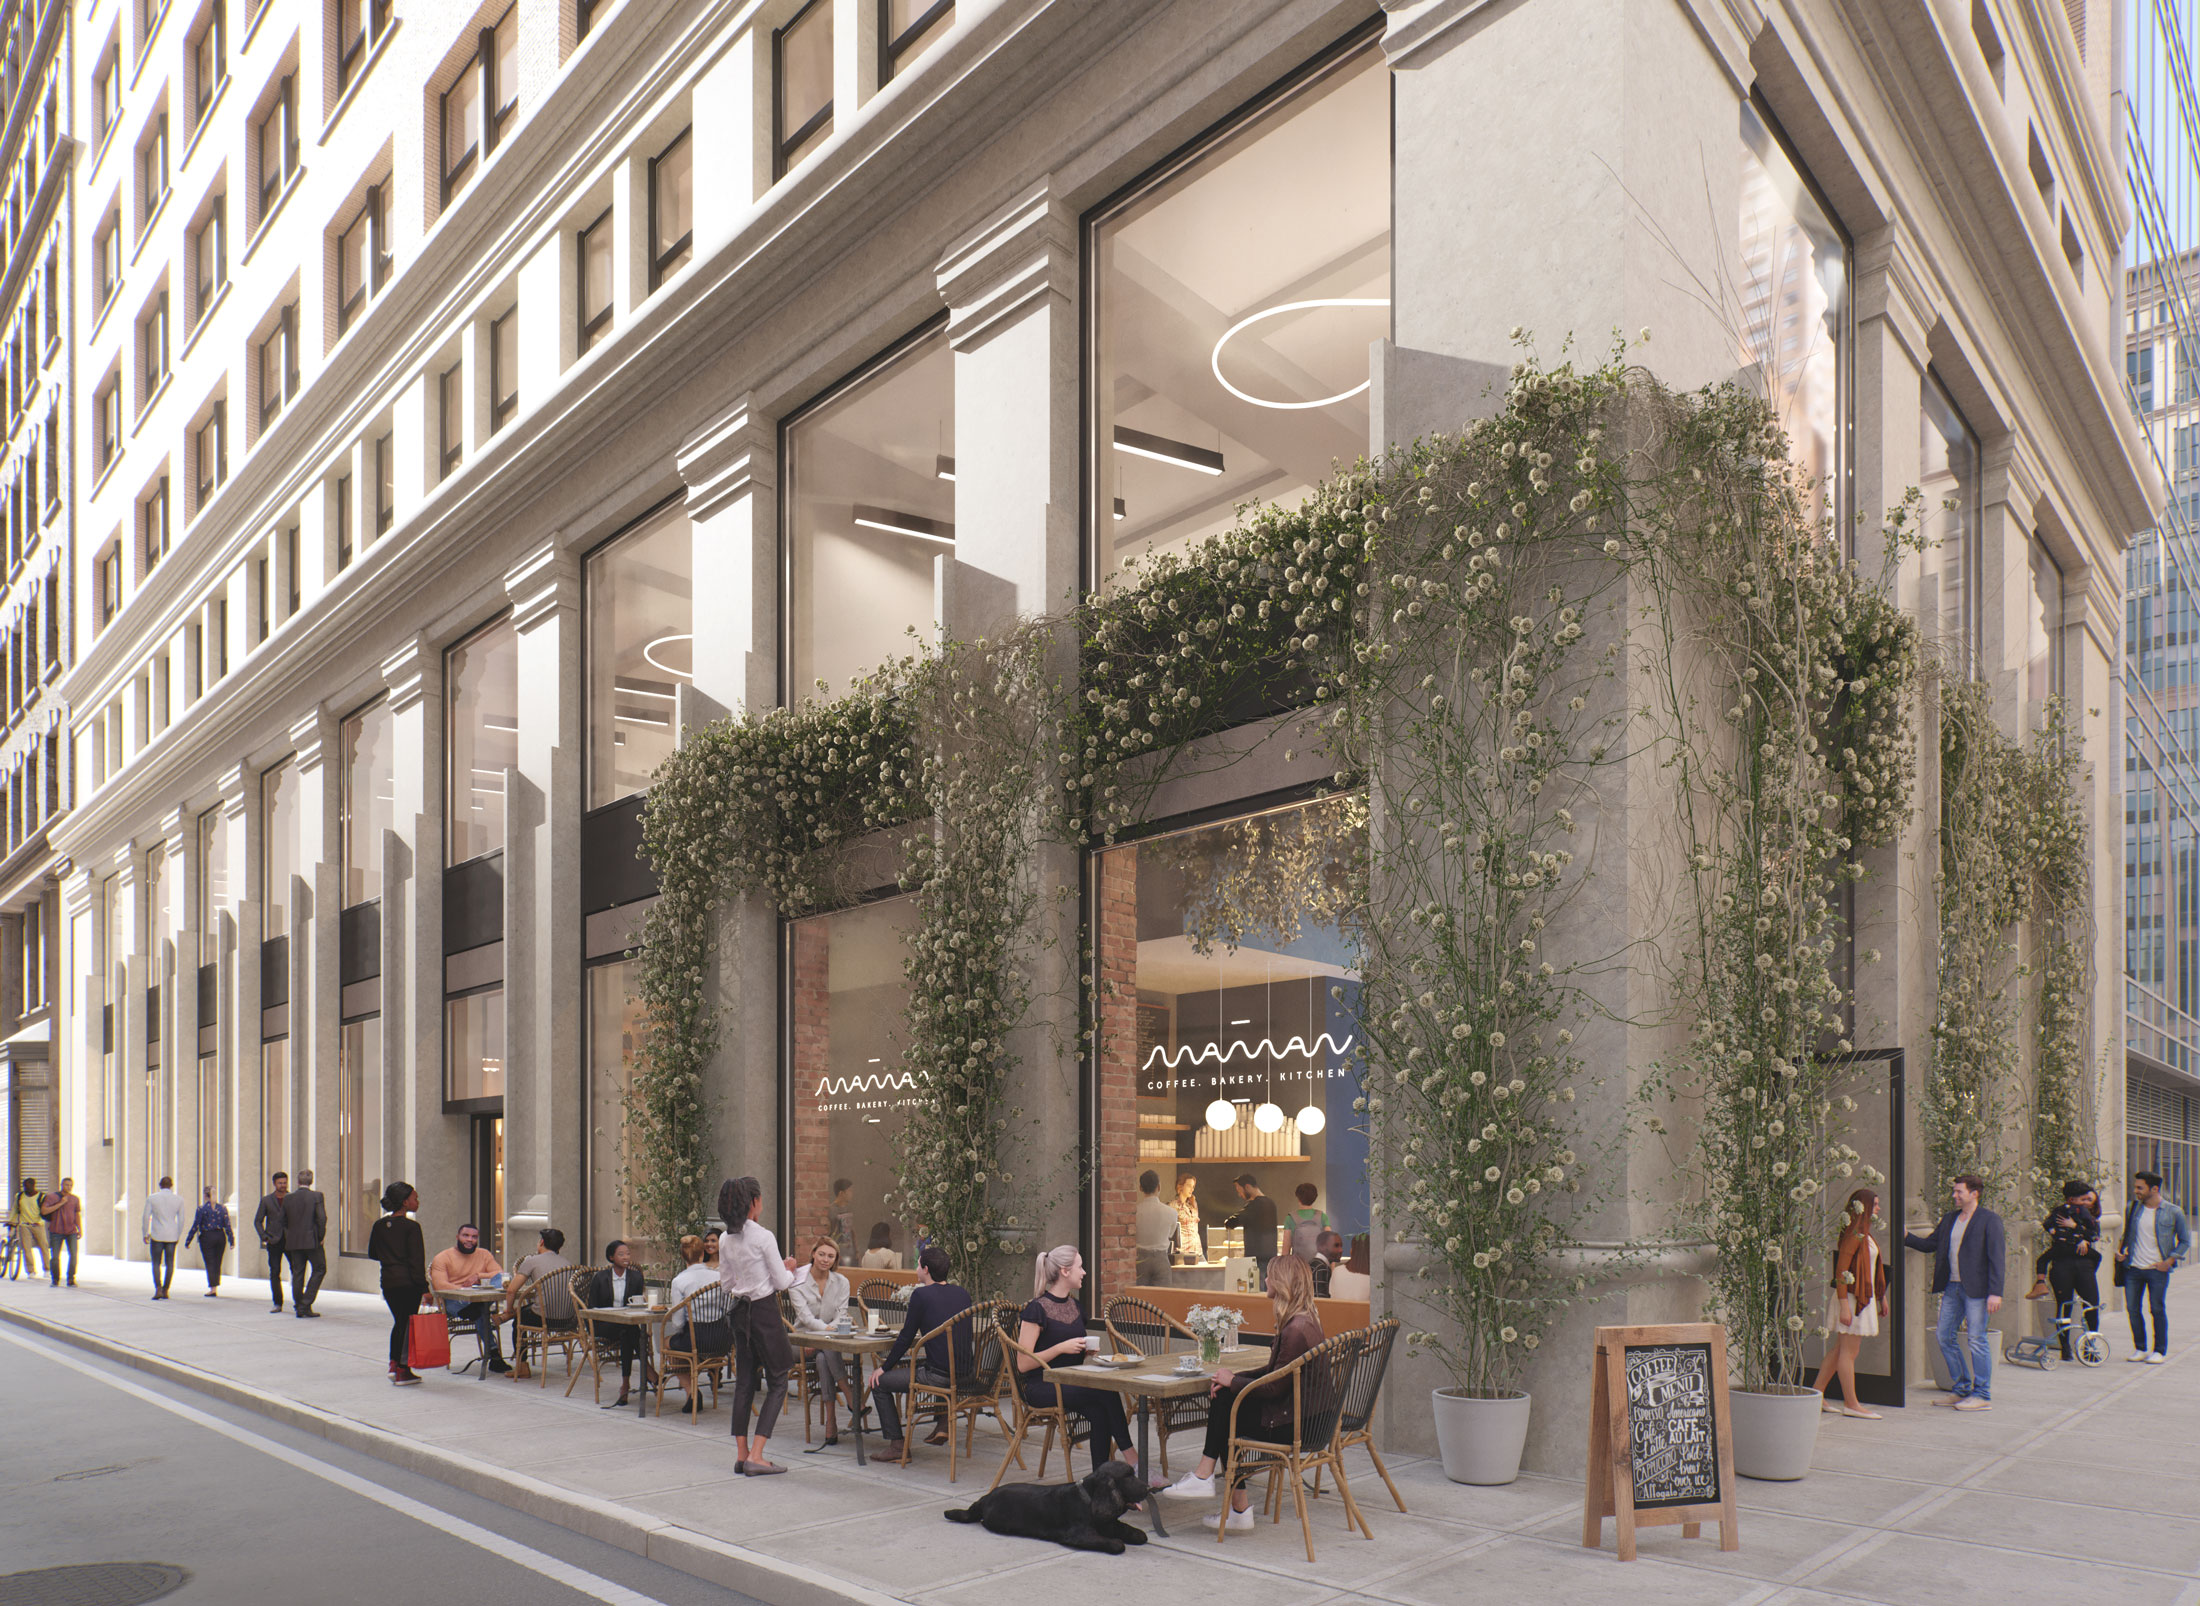 Architectural Rendering of the exterior of the 149 Madison project located in New York City